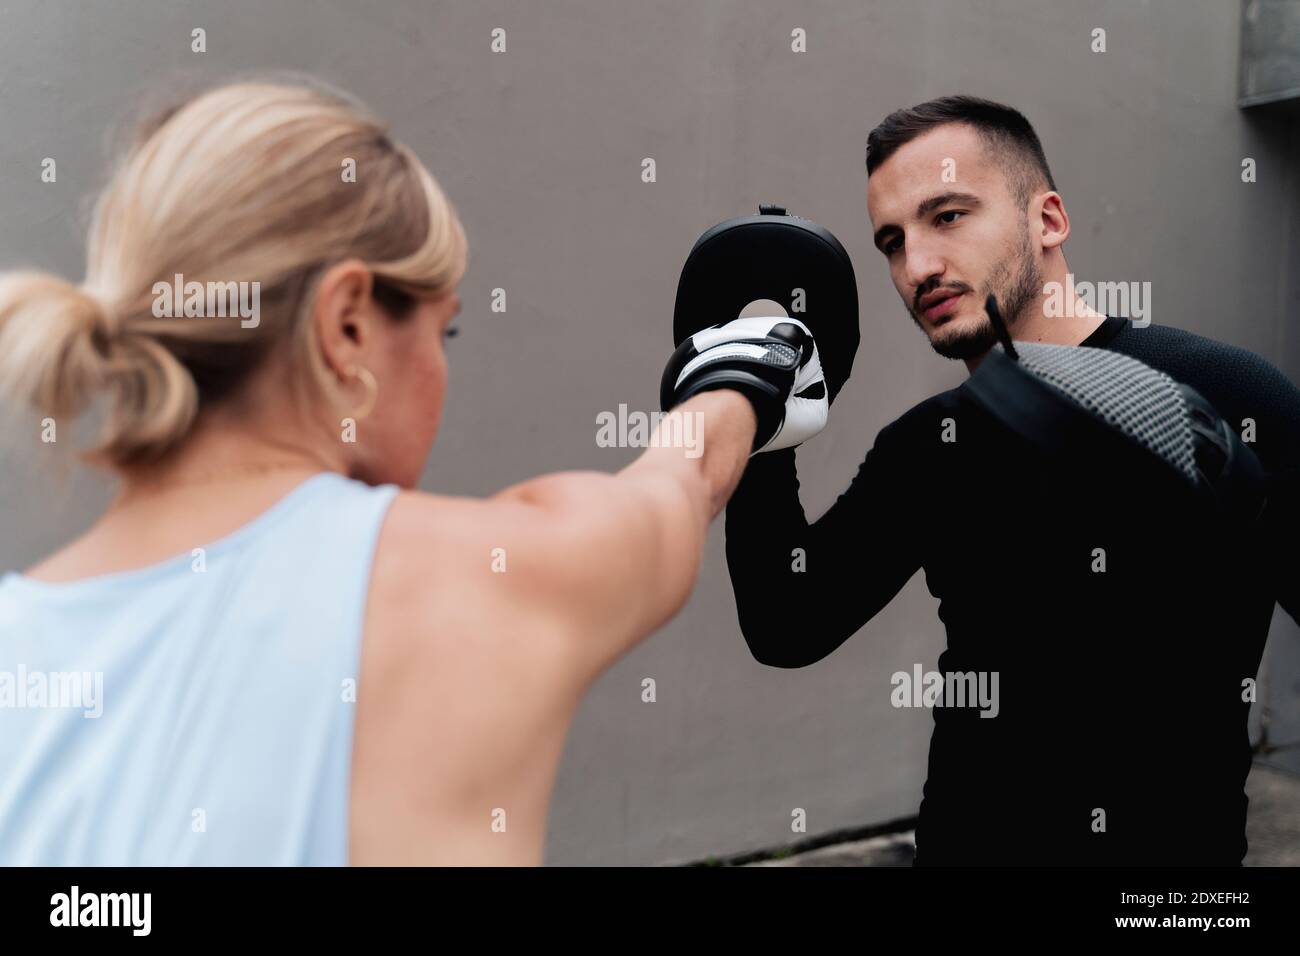 Sportswoman sparring with man while standing against wall Stock Photo